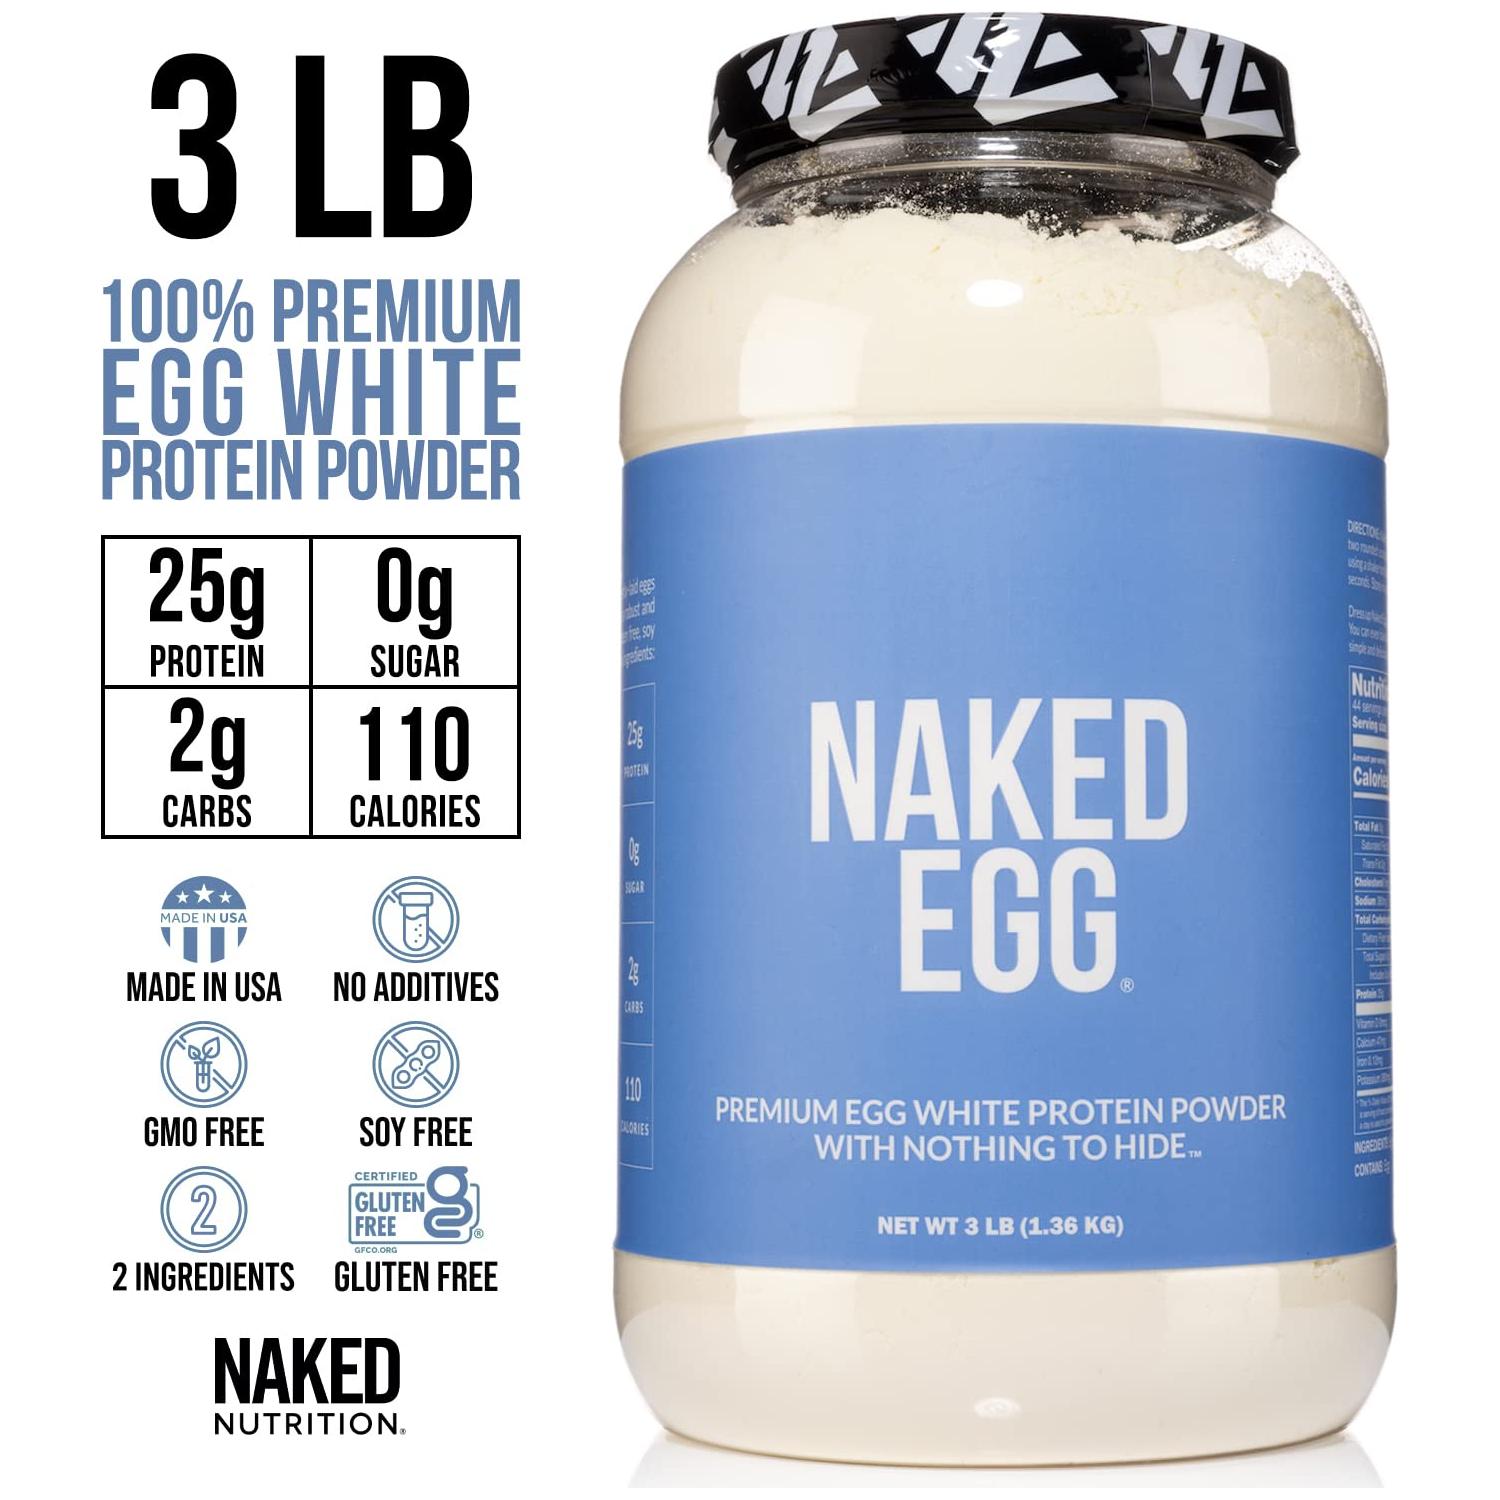 NAKED nutrition 3LB Non-GMO Egg White Protein Supplement Powder, Unflavored, No Additives, Paleo, Dairy Free, Gluten Free, Soy Free - 25g Protein, 44 Servings, 3 pounds